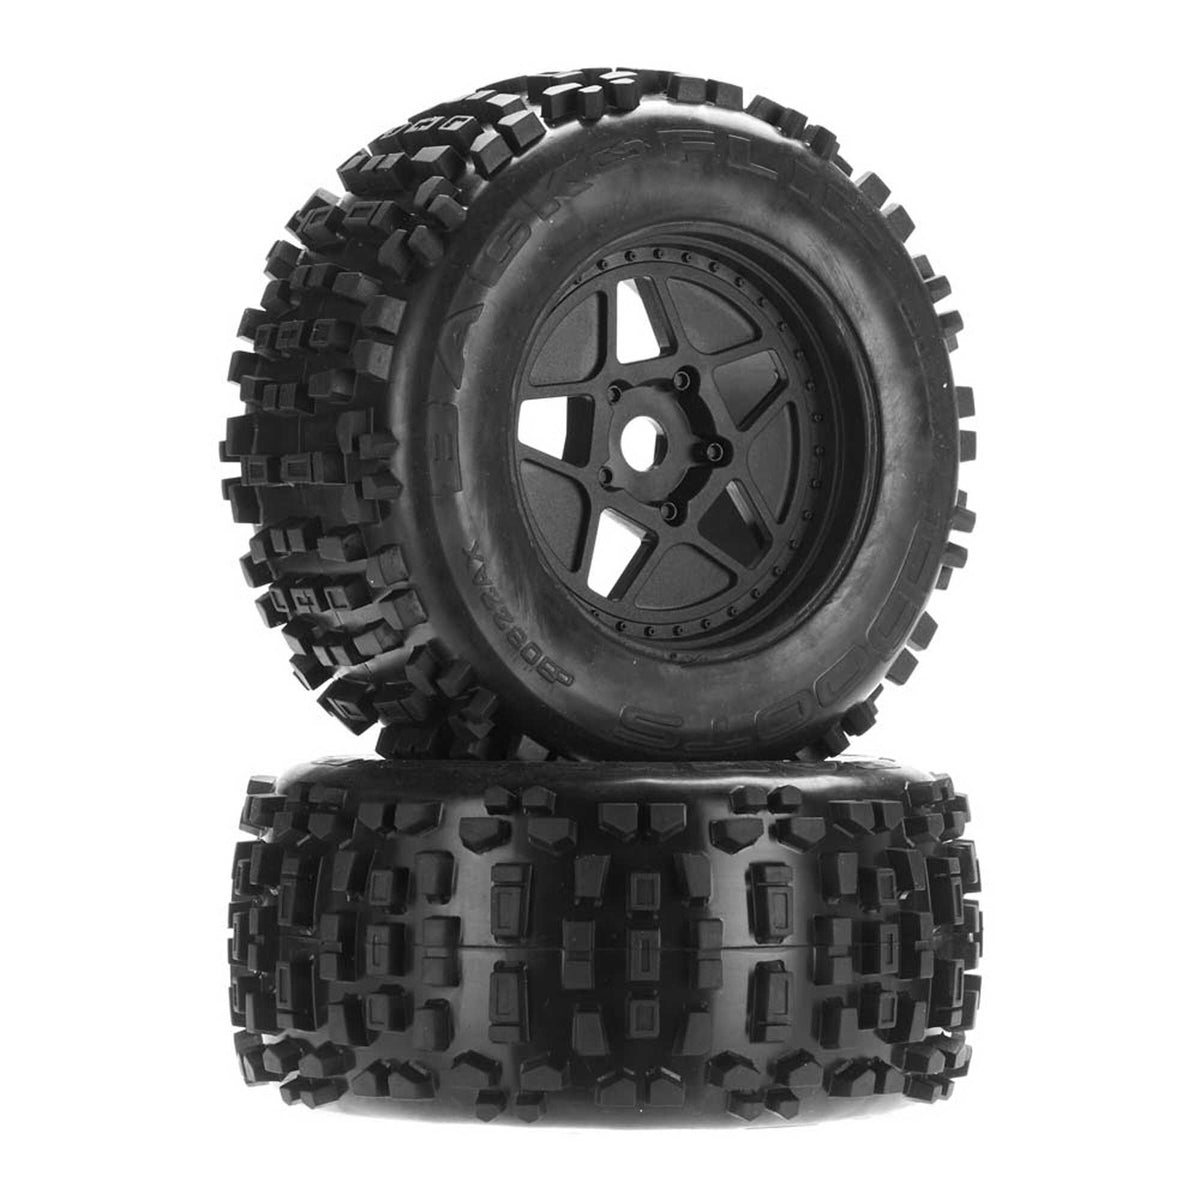 1/8 dBoots Backflip Monster Truck 6S Front/Rear 3.8 Pre-Mounted Tires, 17mm Hex